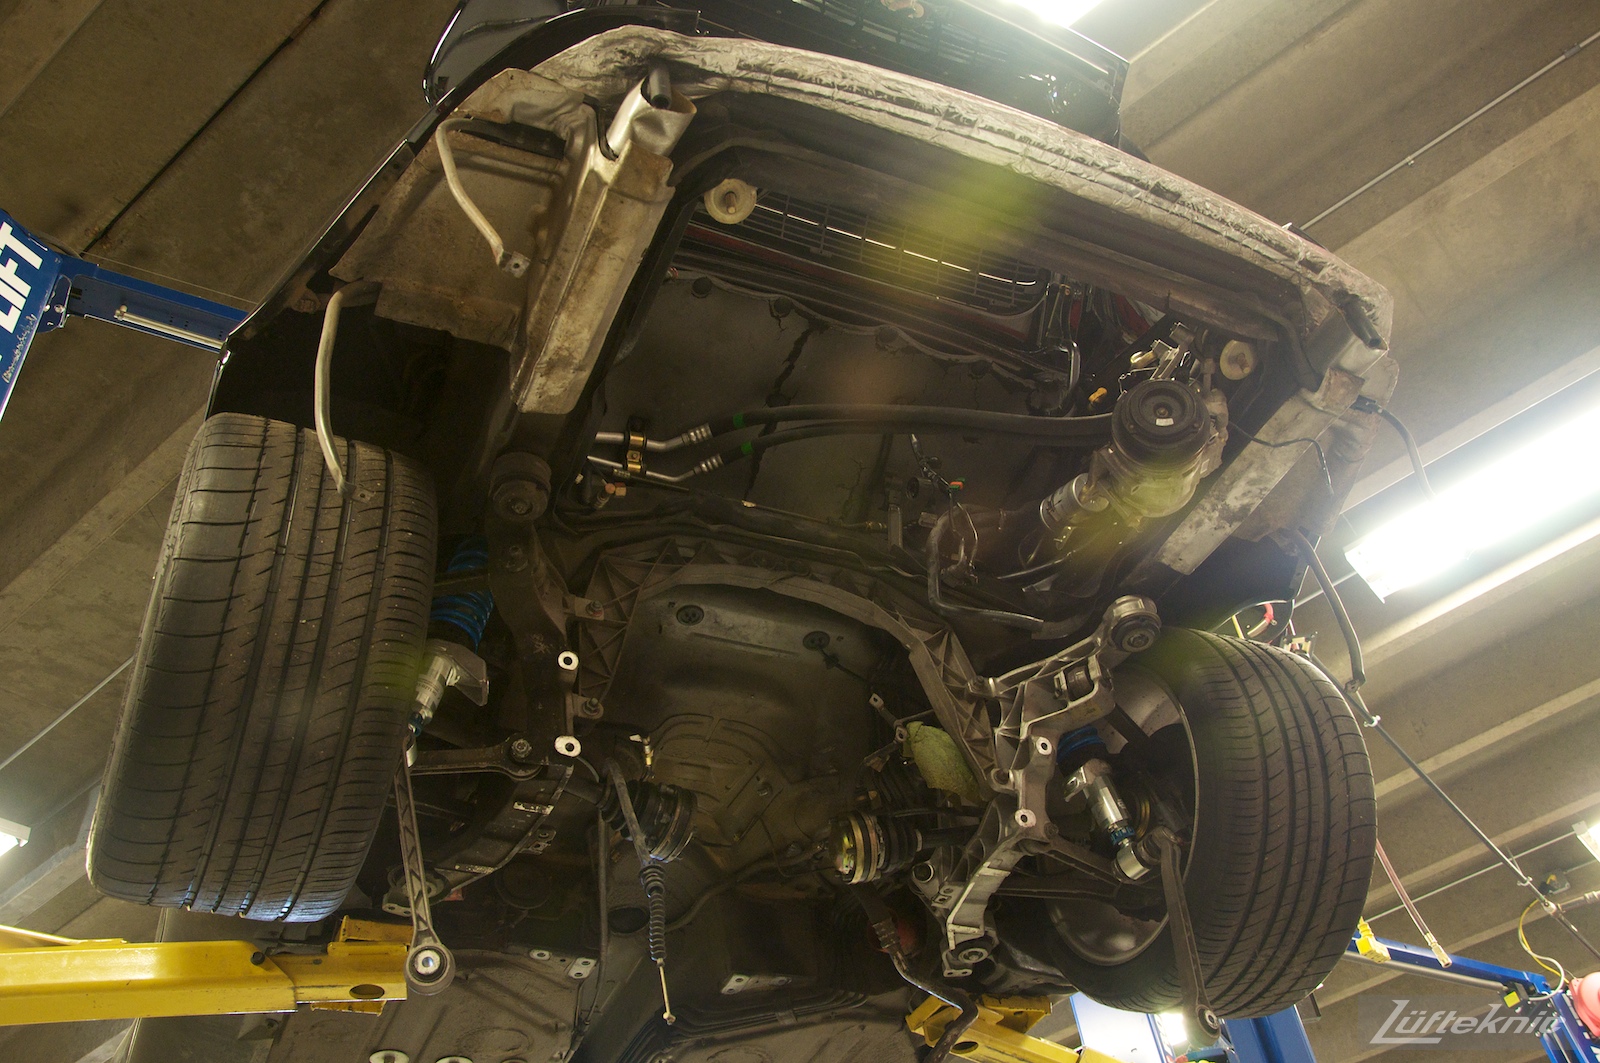 A 993 Turbo viewed from below with no engine or transmission installed.